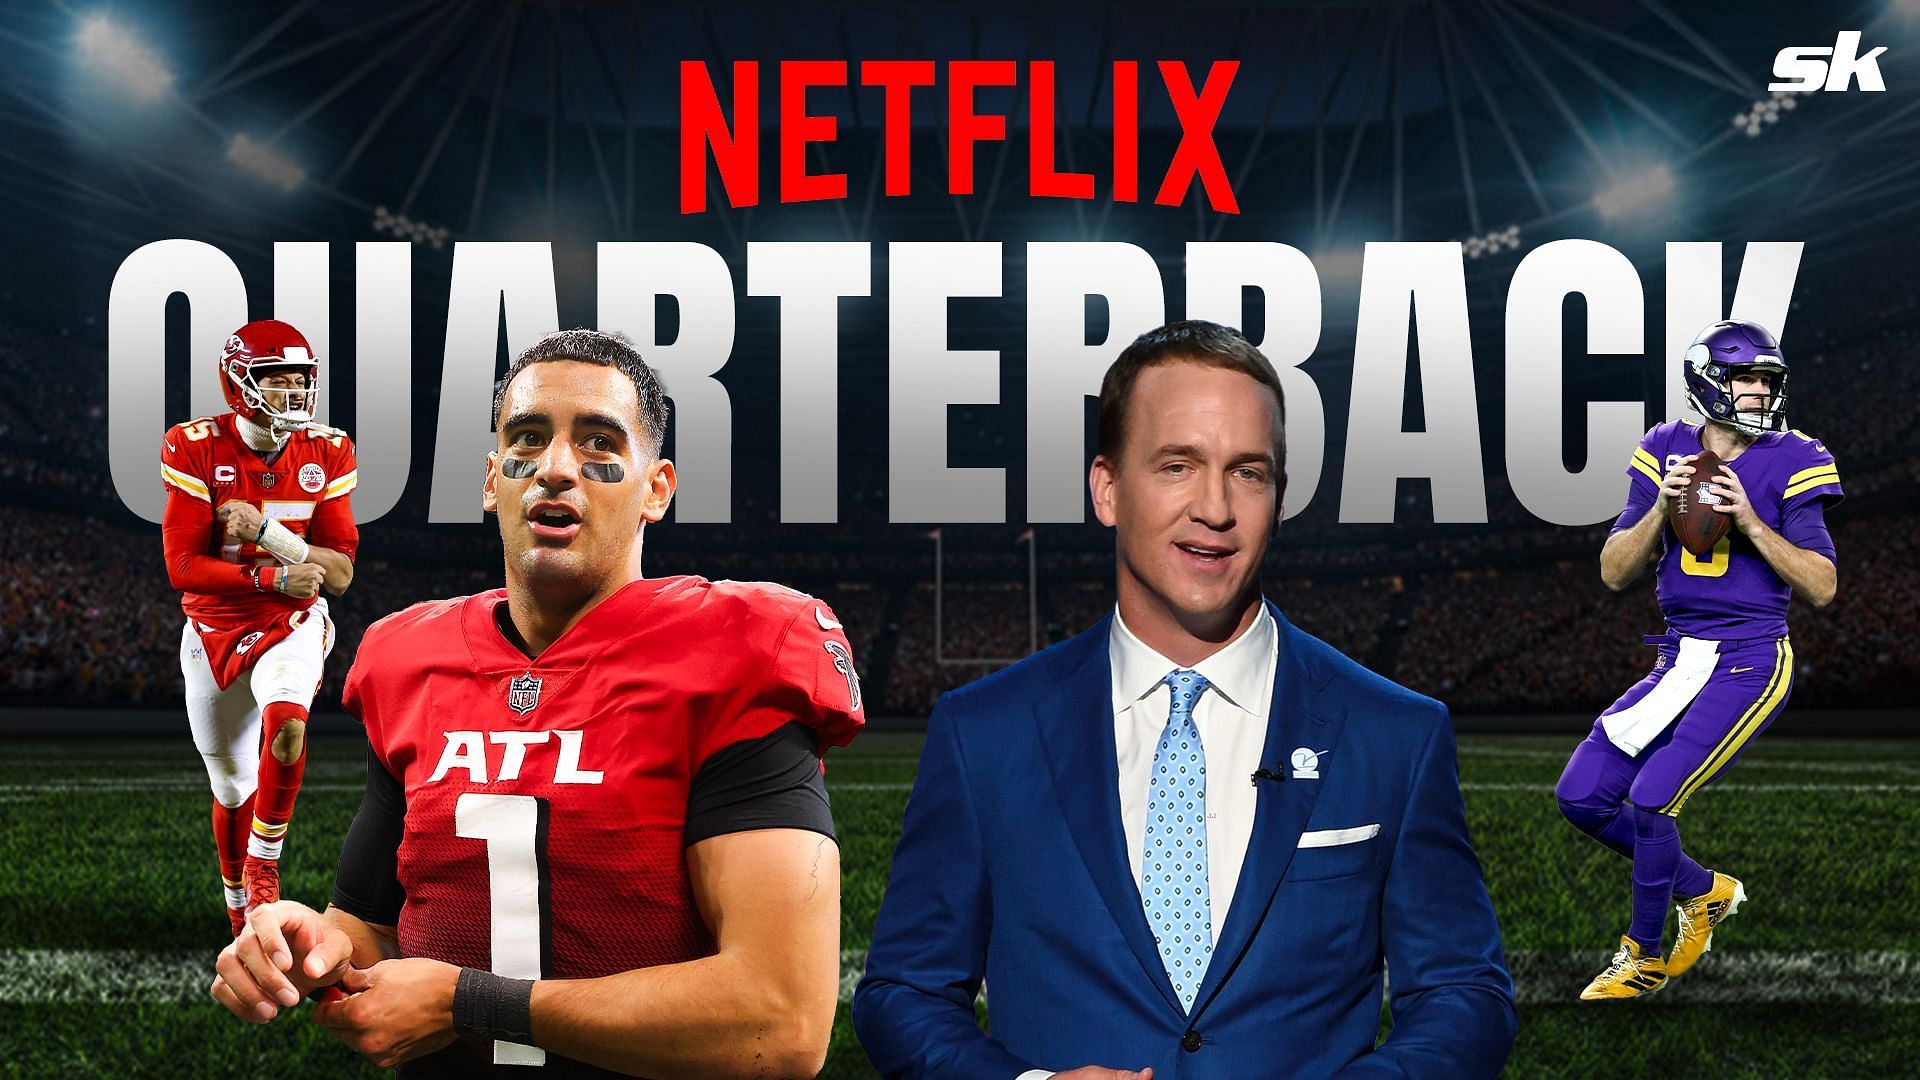 Peyton Manning was extremely happy with Marcus Mariota for starring in Netflix